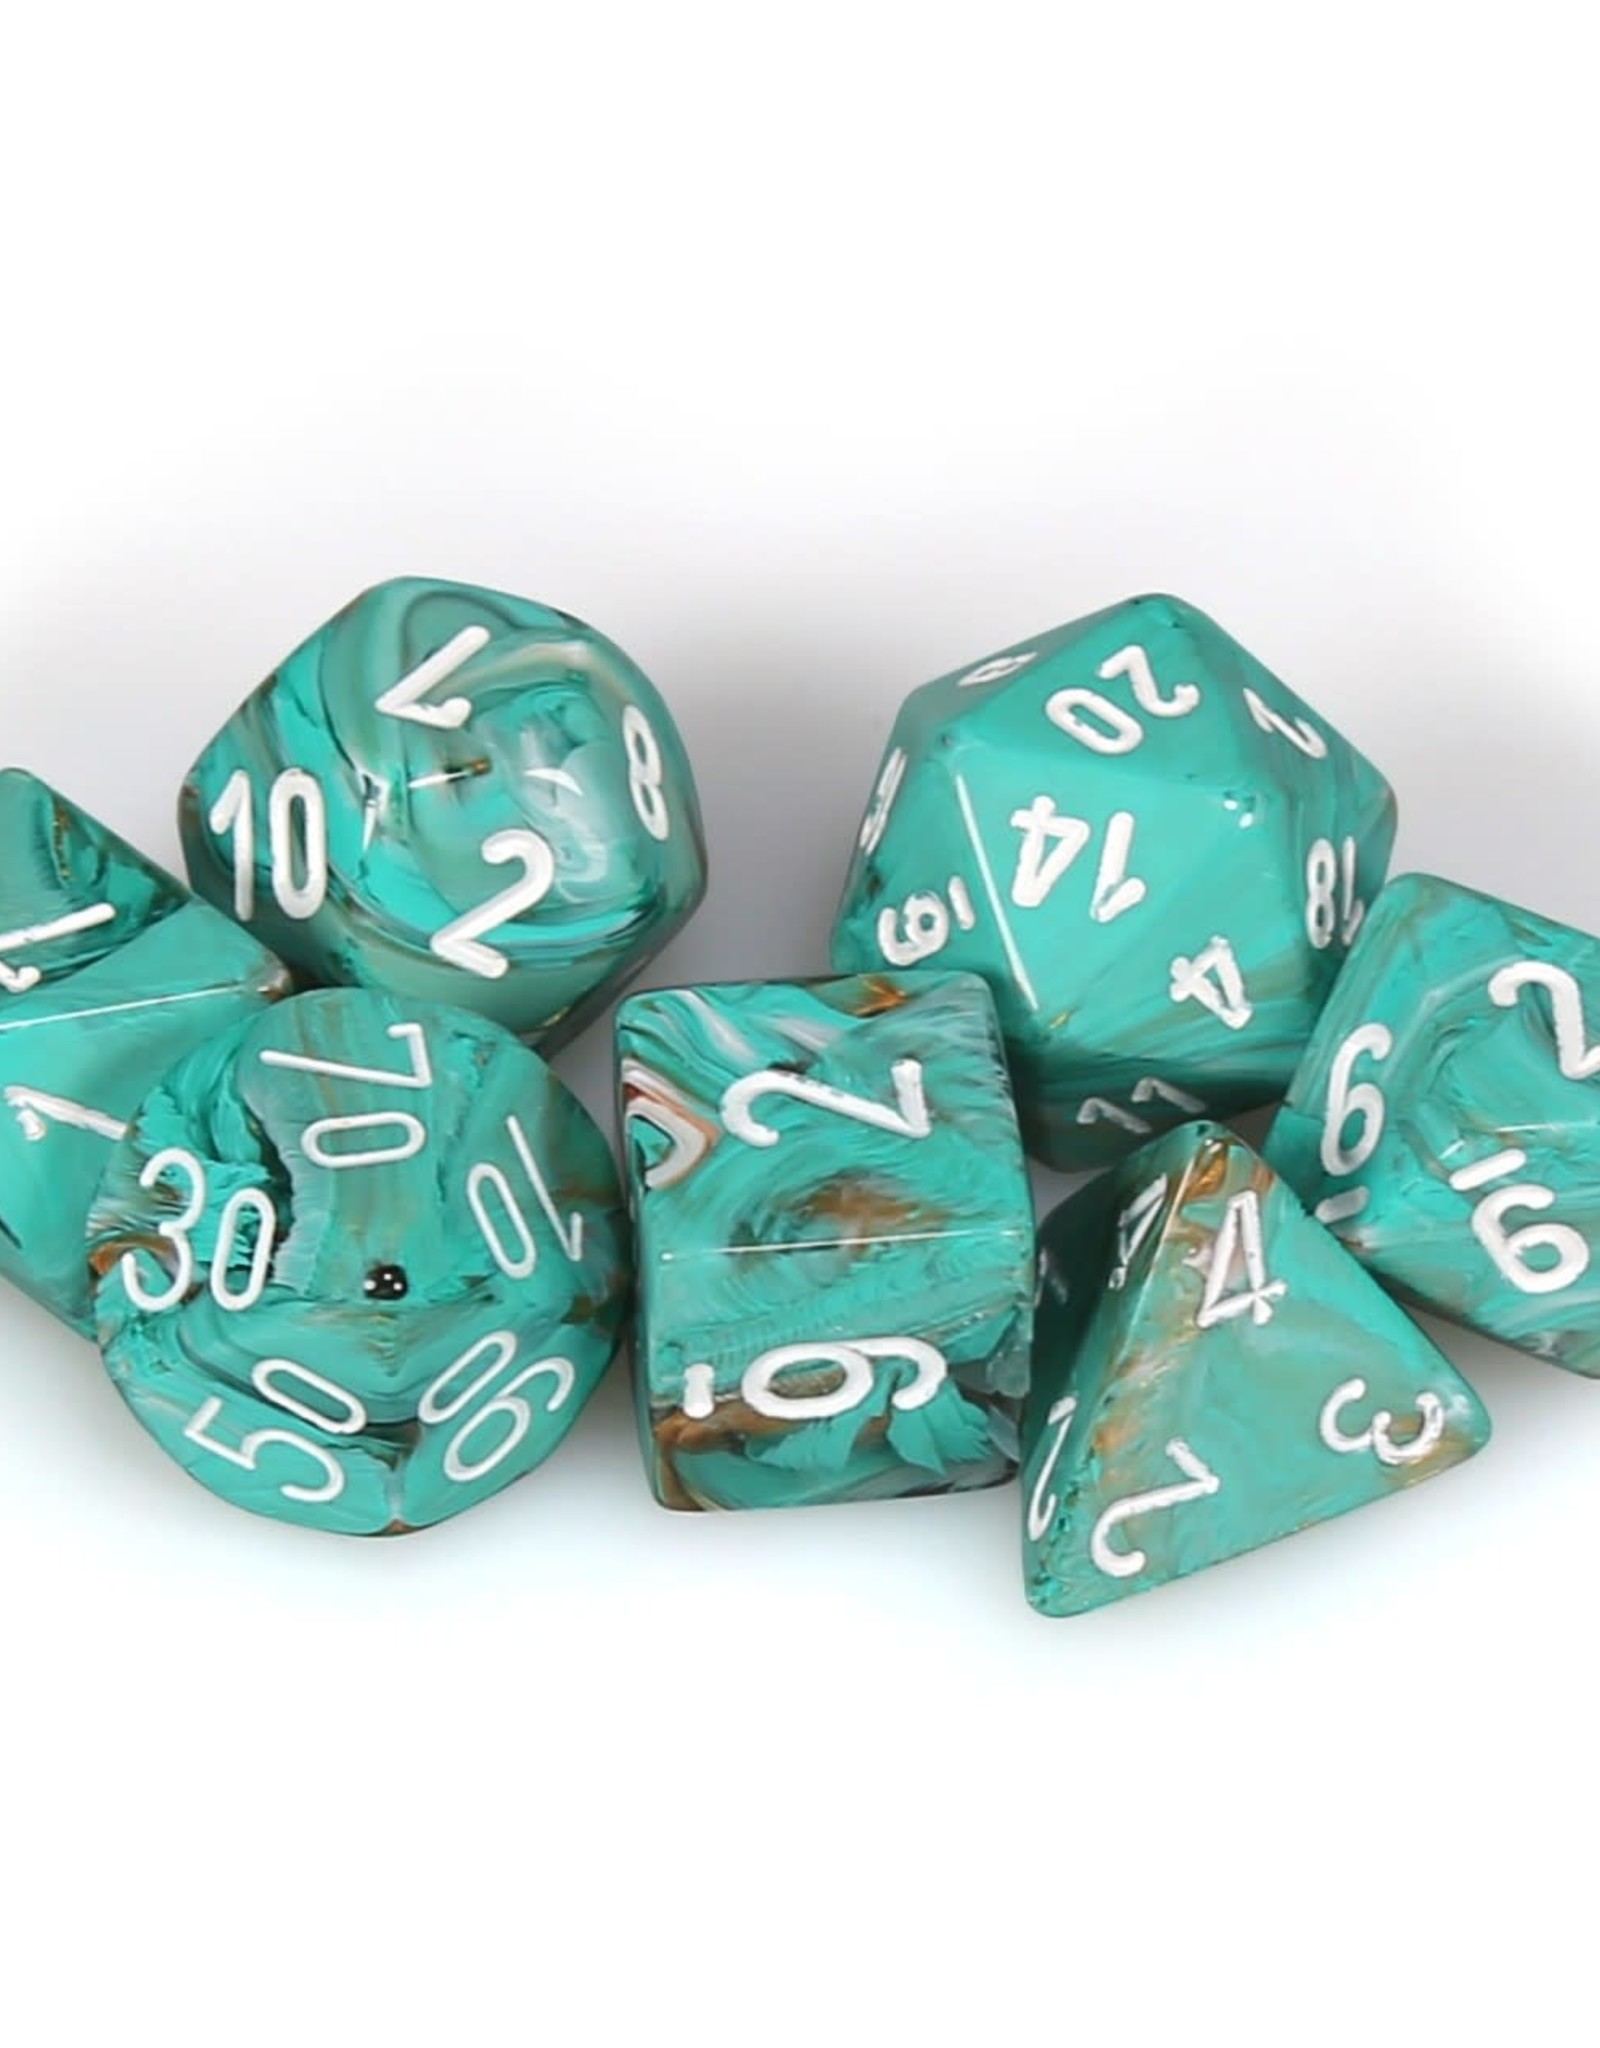 Chessex CHX Marble Dice: Oxi-Copper/White Poly 7-Die Set 27403